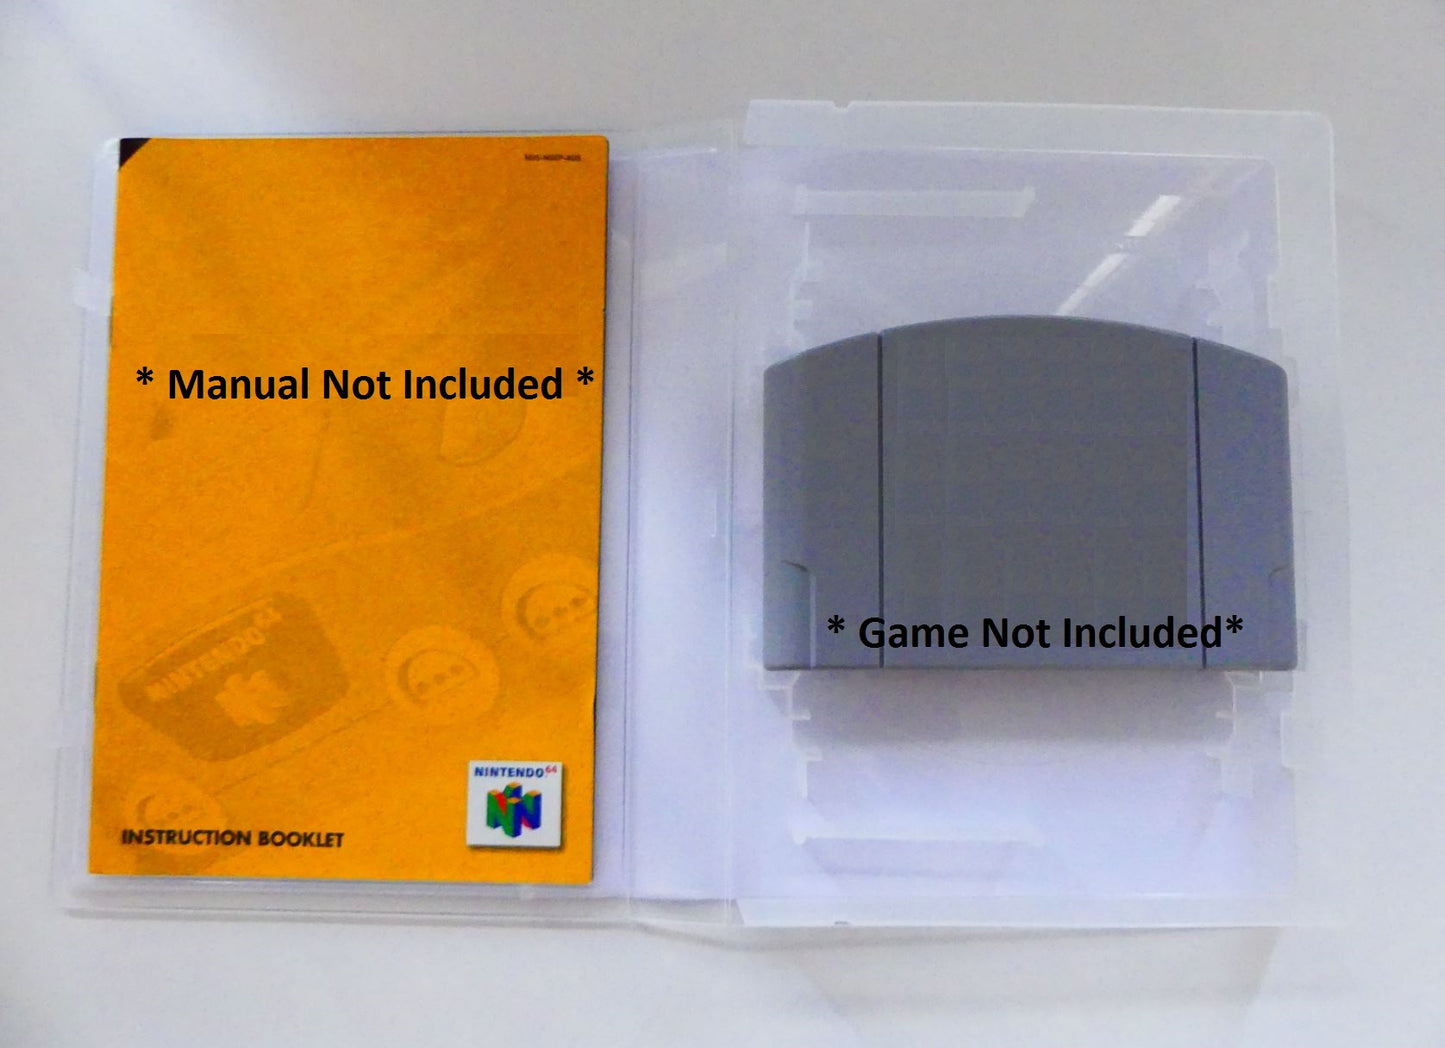 The New Tetris - N64 Replacement Case